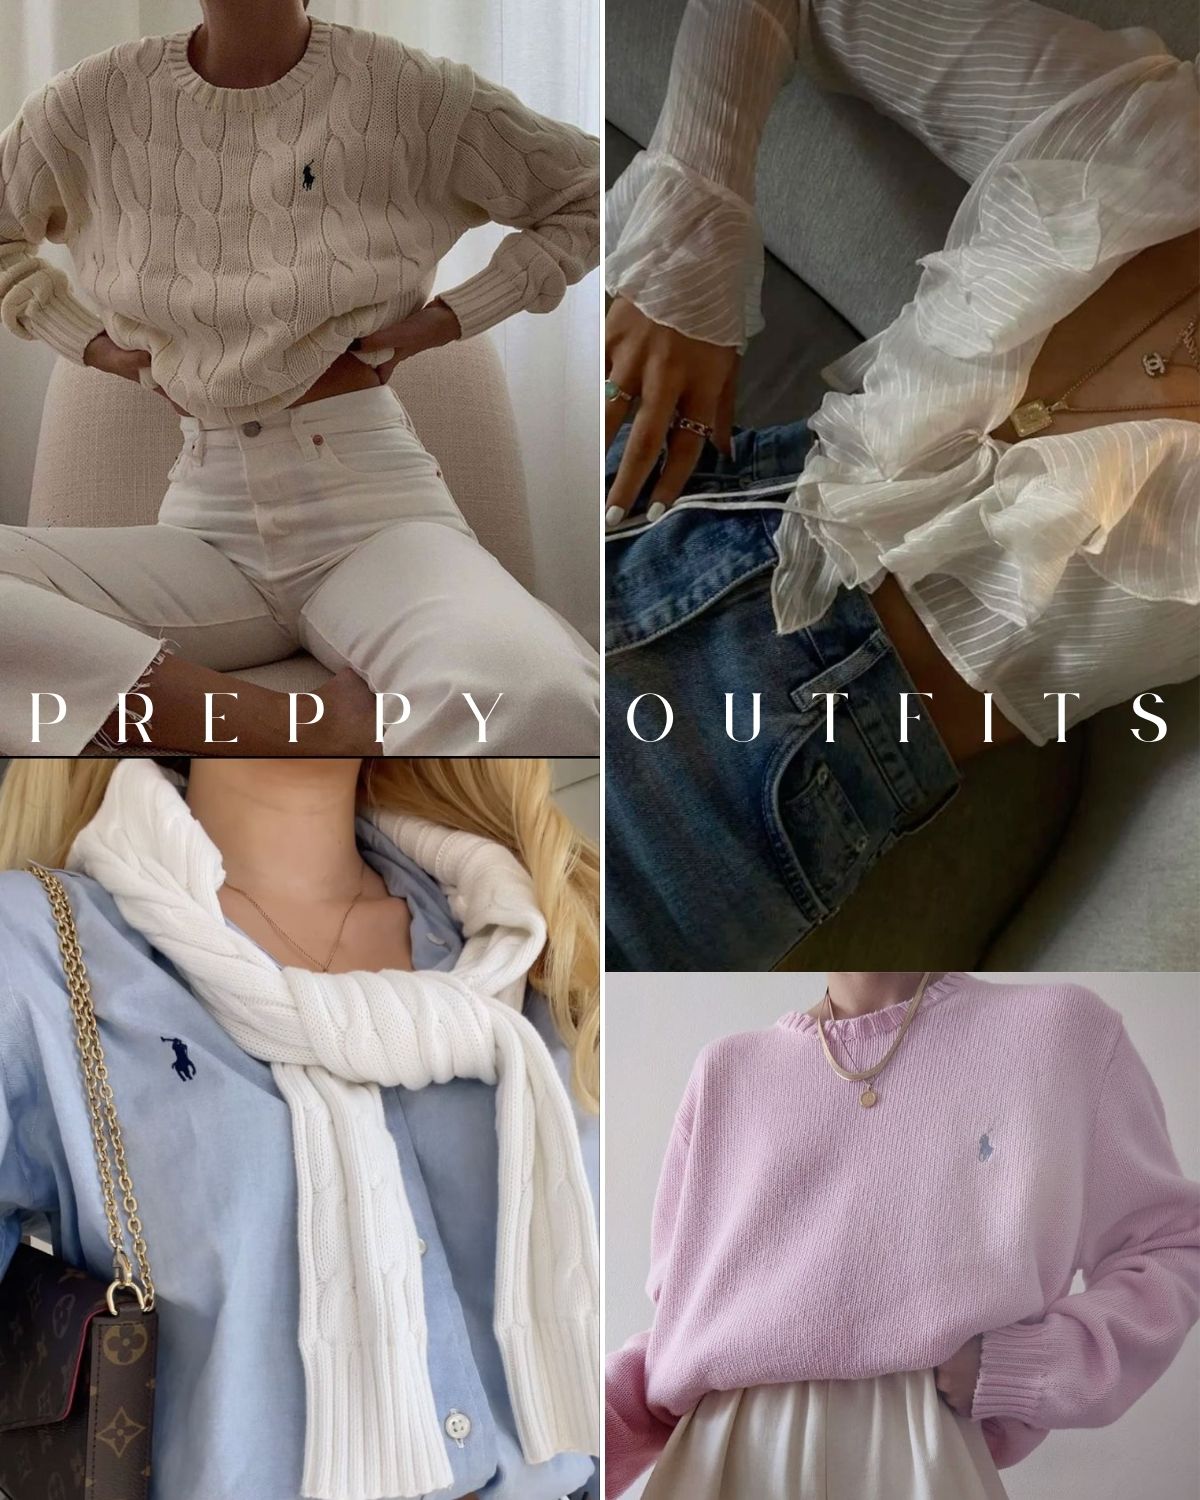 Four outfits with button downs and sweaters